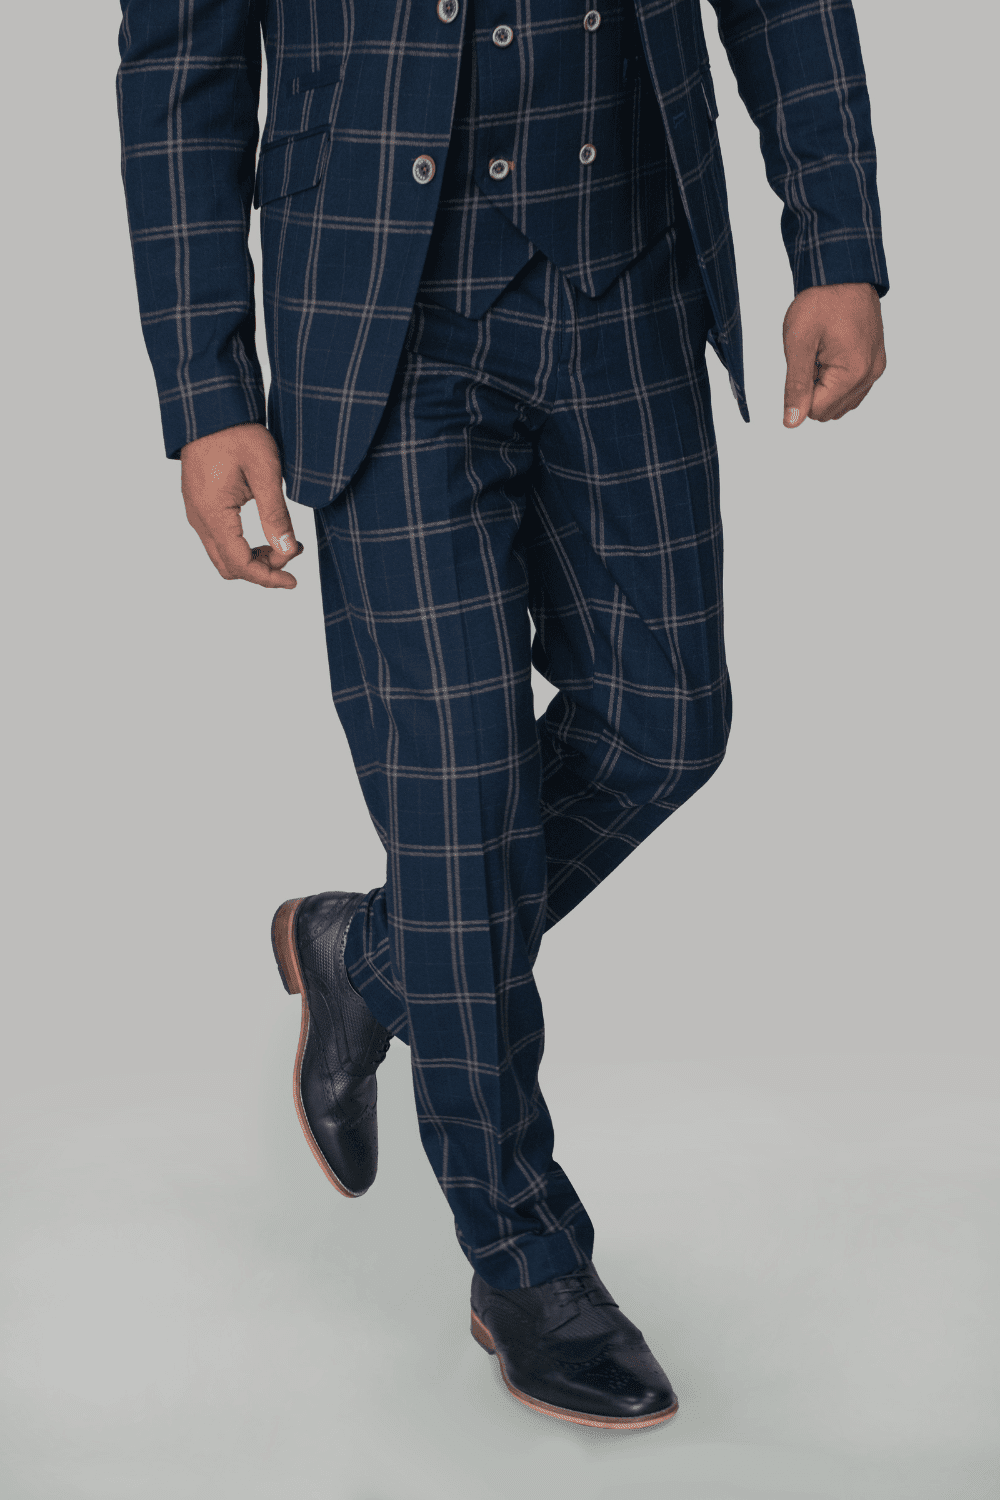 Hardy Navy Checked 3 Piece Suit - Suits - - THREADPEPPER